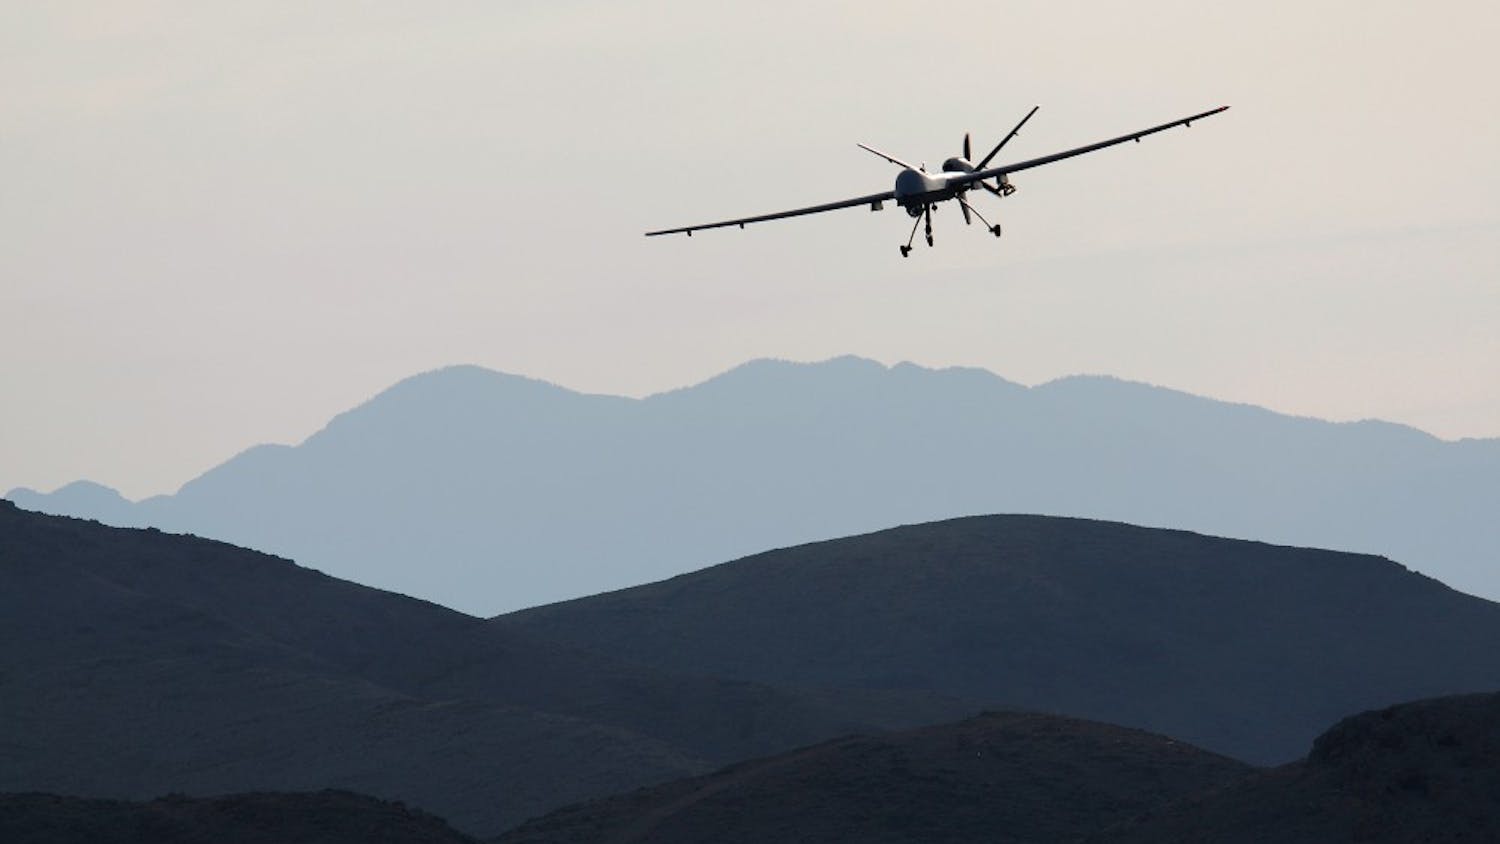 A Reaper drone aircraft comes in for a landing at Creech Air Force Base in Nevada during a training program to bring more pilots online for an expanded use of drones in the skies over Iraq and Afghanistan as well as for missions elsewhere around the world. (Rick Loomis/Los Angeles Times/TNS)